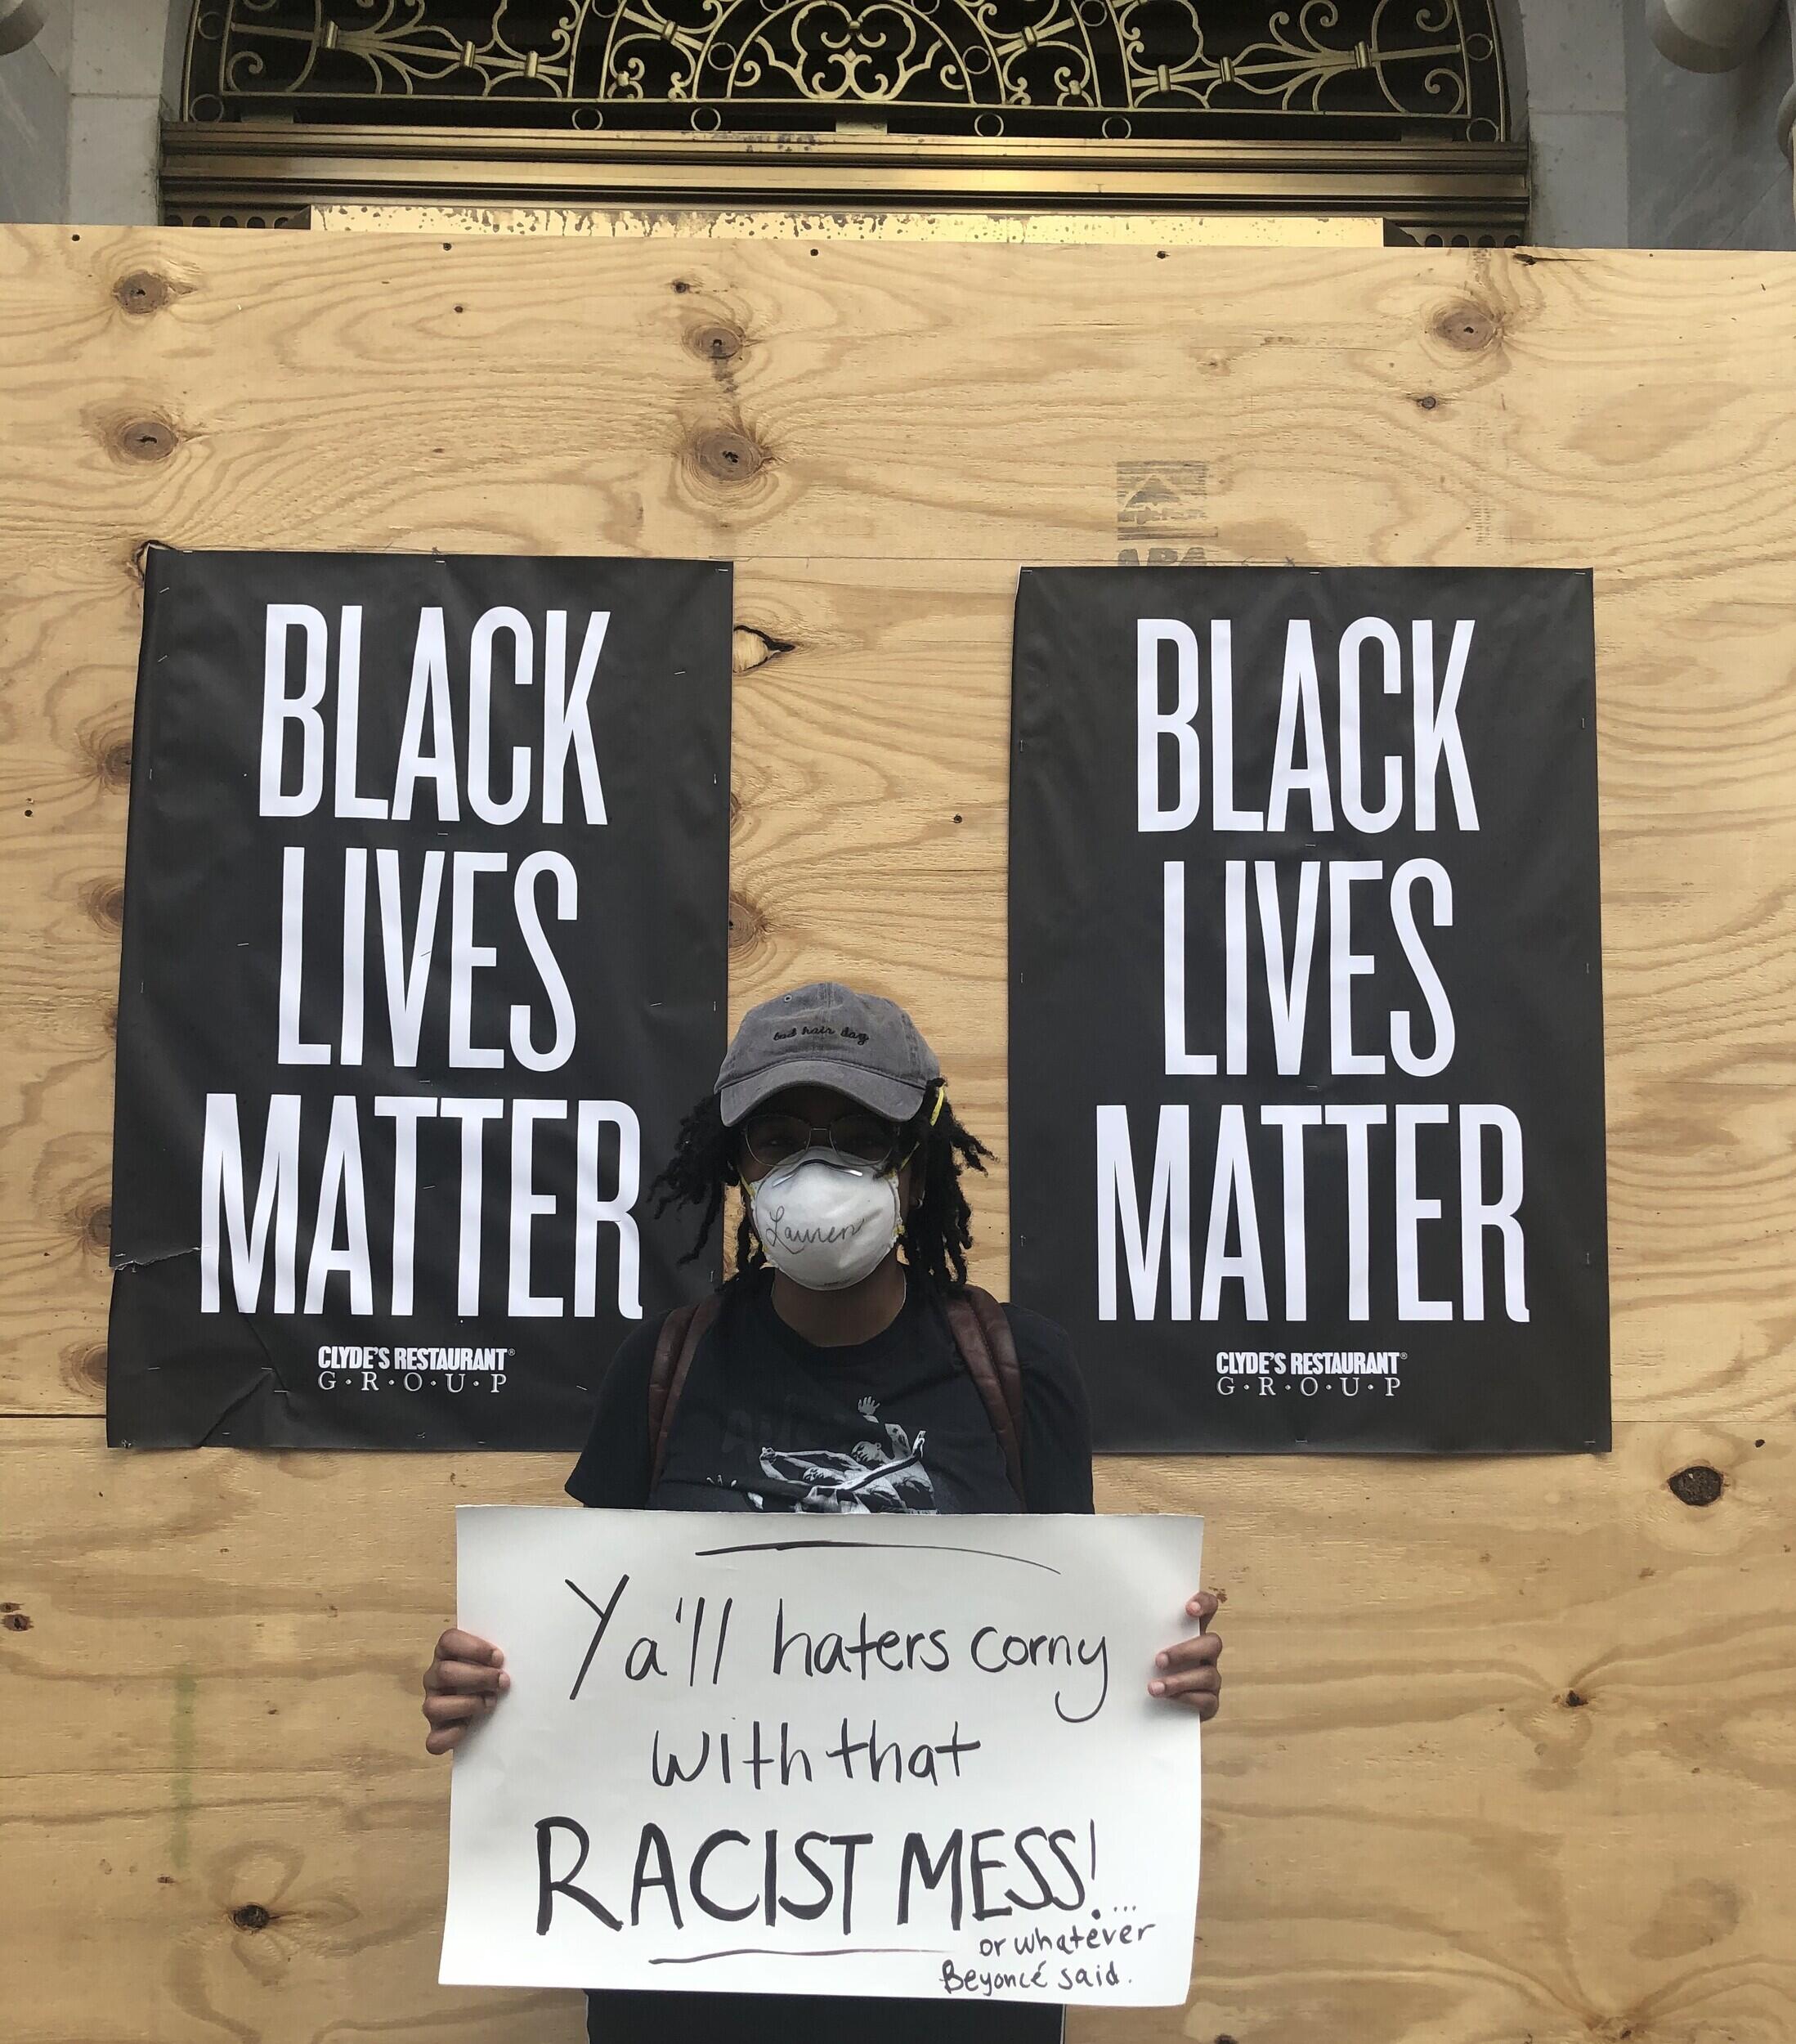 A person holding a sign in front of plywood boards with Black Lives Matter posters. The held sign reads "Y'all haters corny with that RACIST MESS! or whatever Beyonce said."